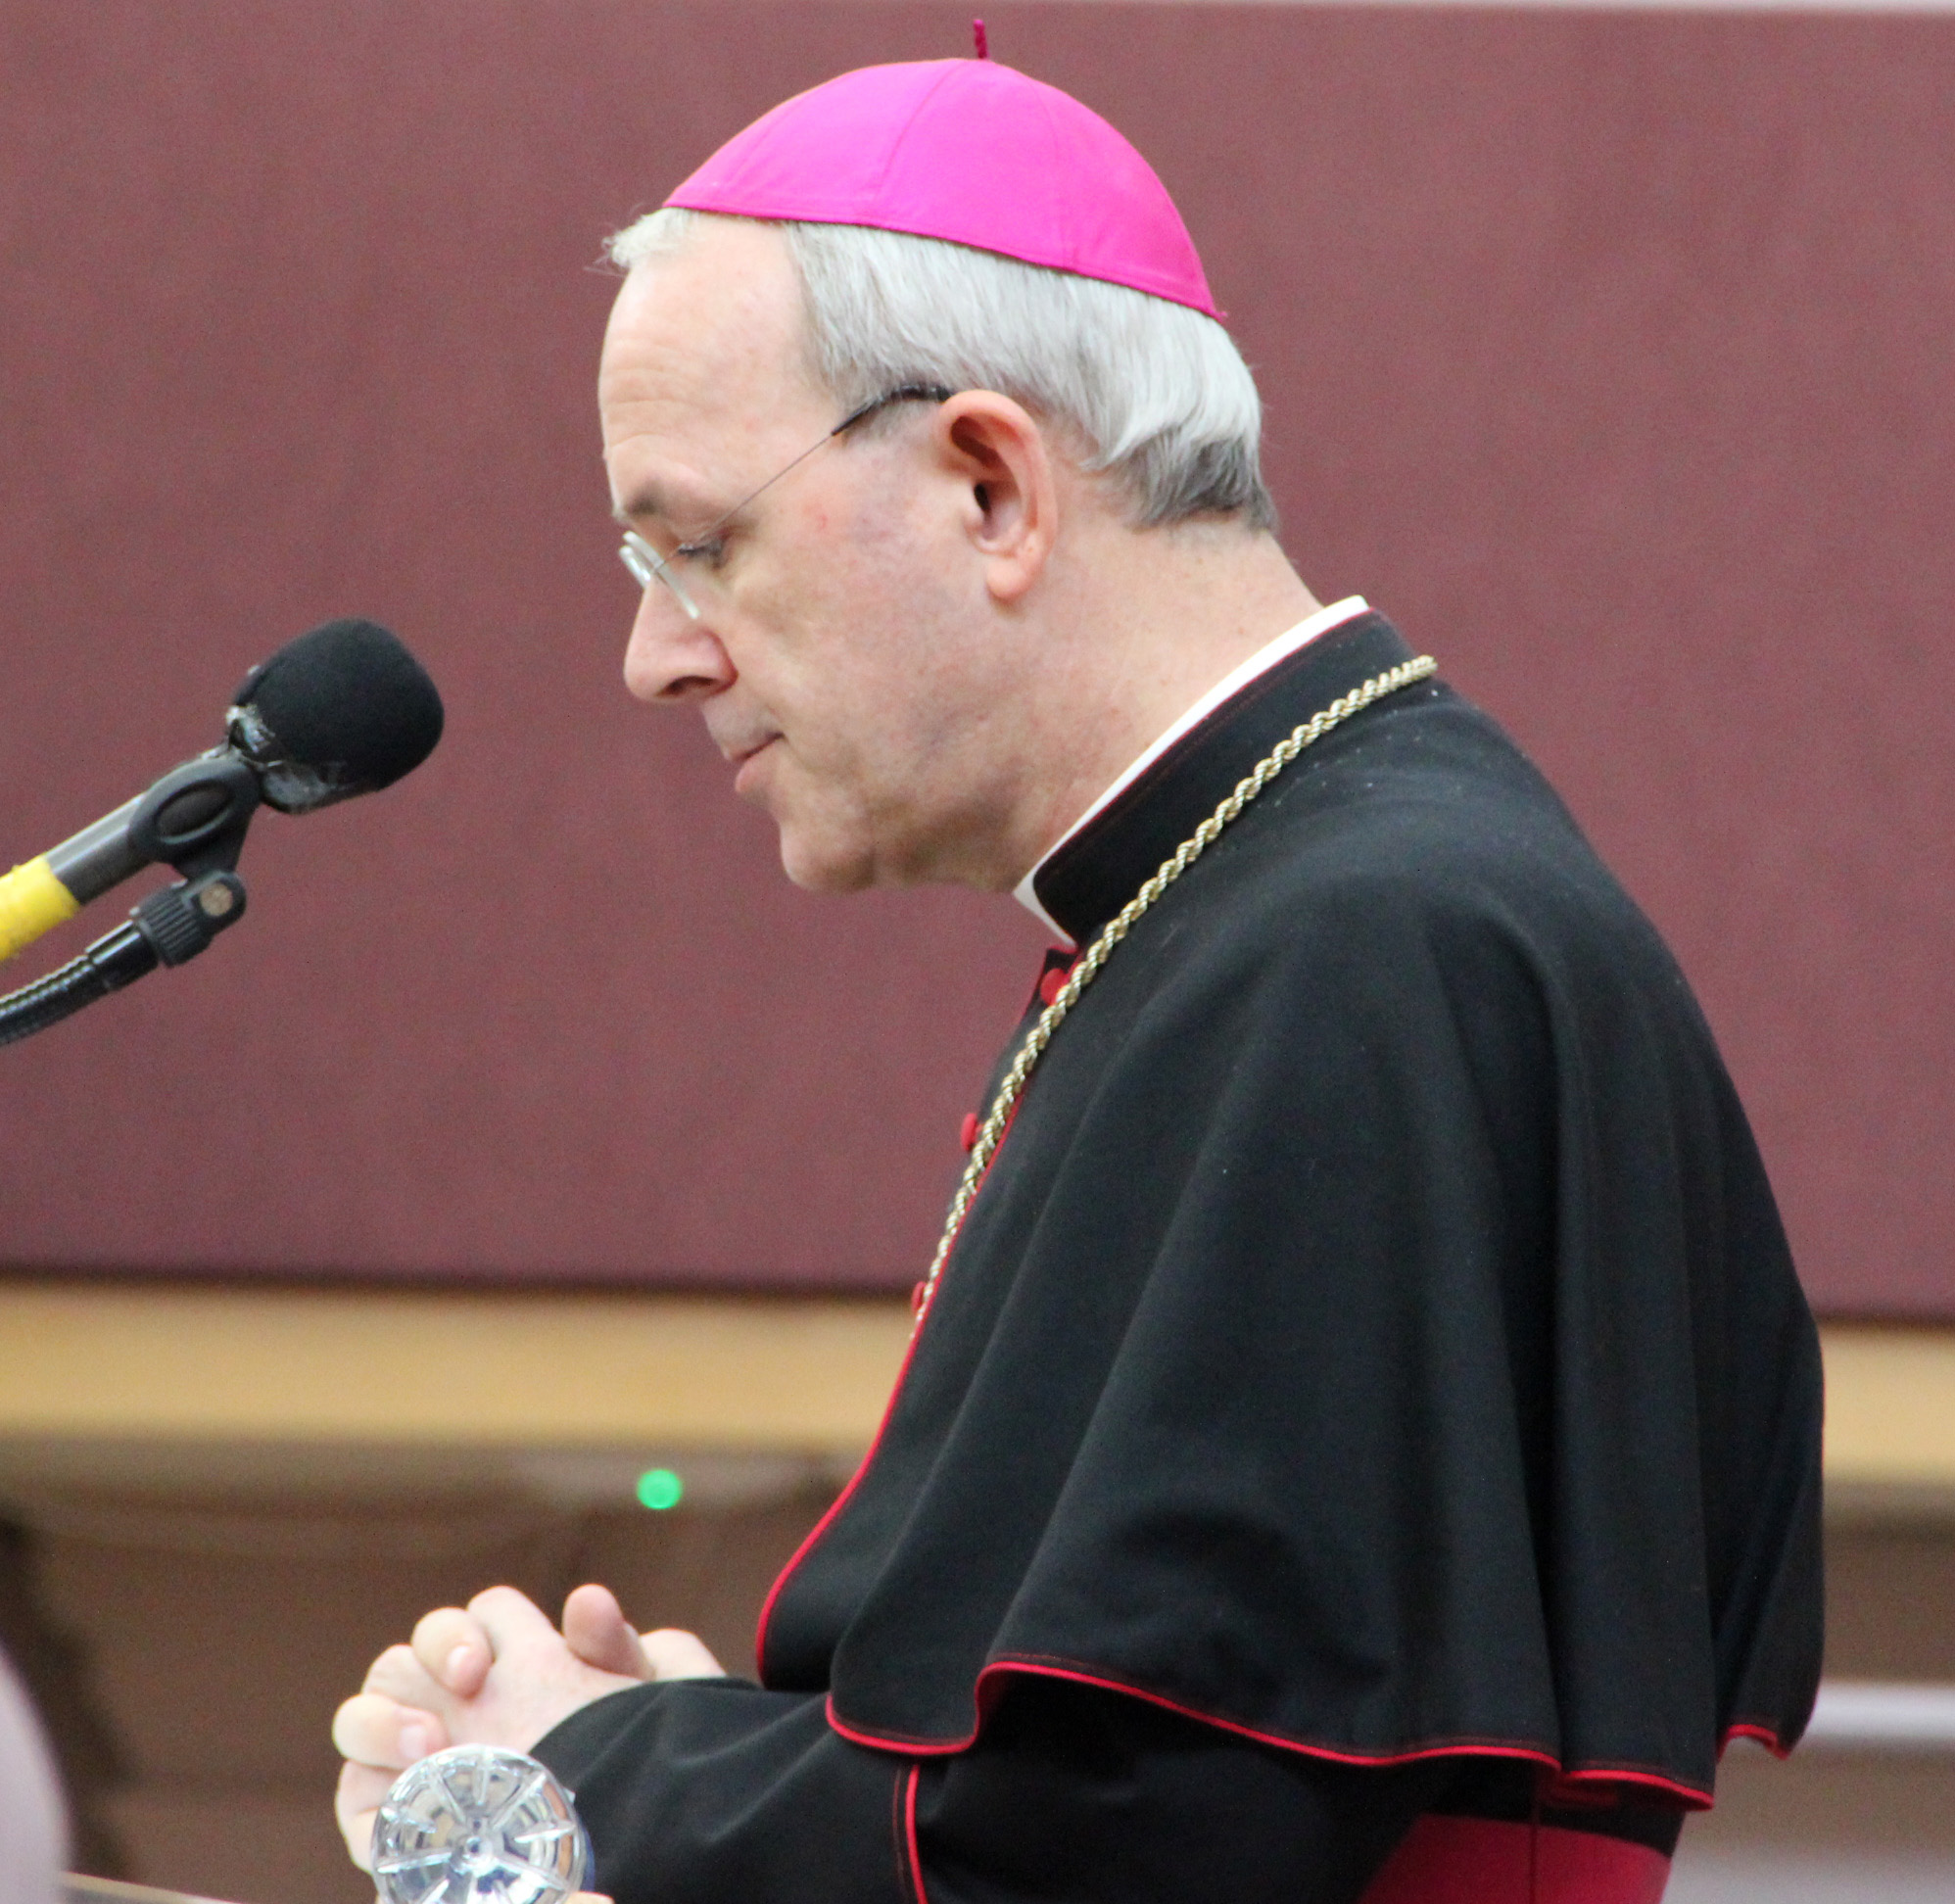 Bishop Athanasius Schneider speaks about ‘The Renewal of the liturgy according to the perennial sense of the Church’ to the LMS Conference in May 2014